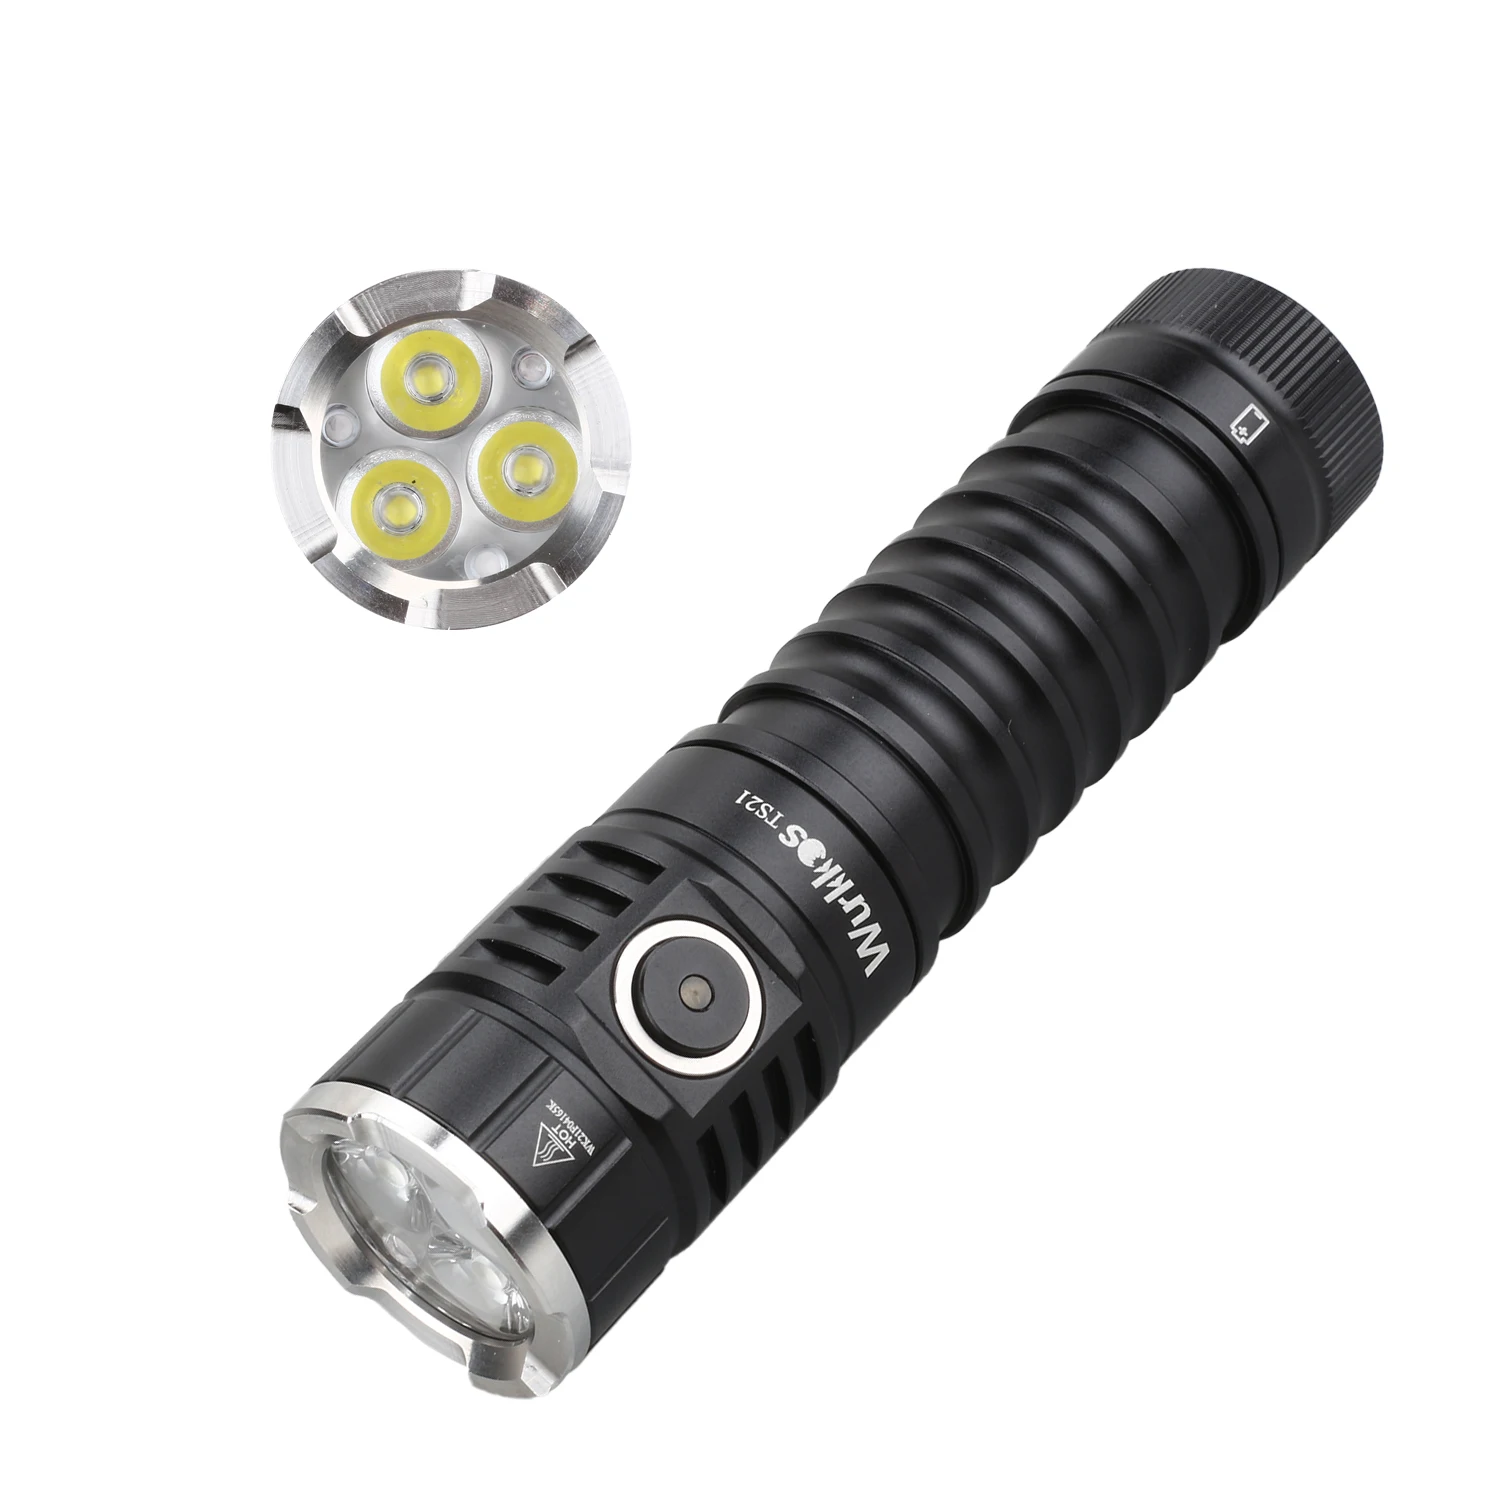 

Wurkkos TS21 USB C Rechargeable 21700 LED Flashlight 3*SST20 3500lm Anduril UI with Magnet Tail Stainless Steel Bezel